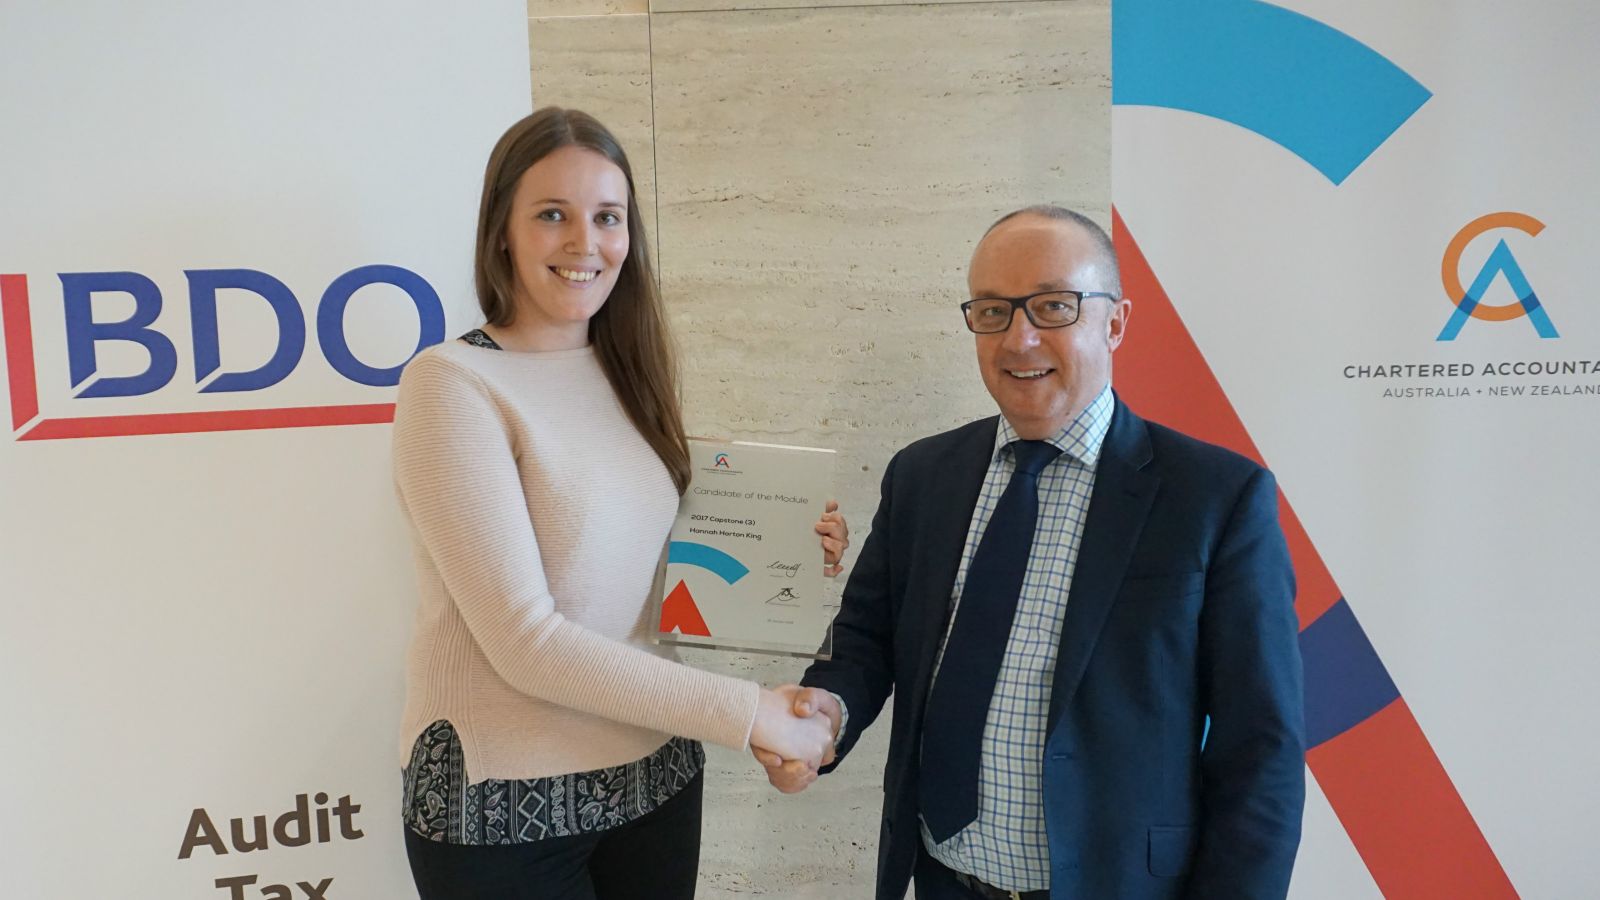 Peter Vial, New Zealand Country Head of CA ANZ, congratulates Hannah Horton for Australasian-topping effort in the Capstone Module exams.